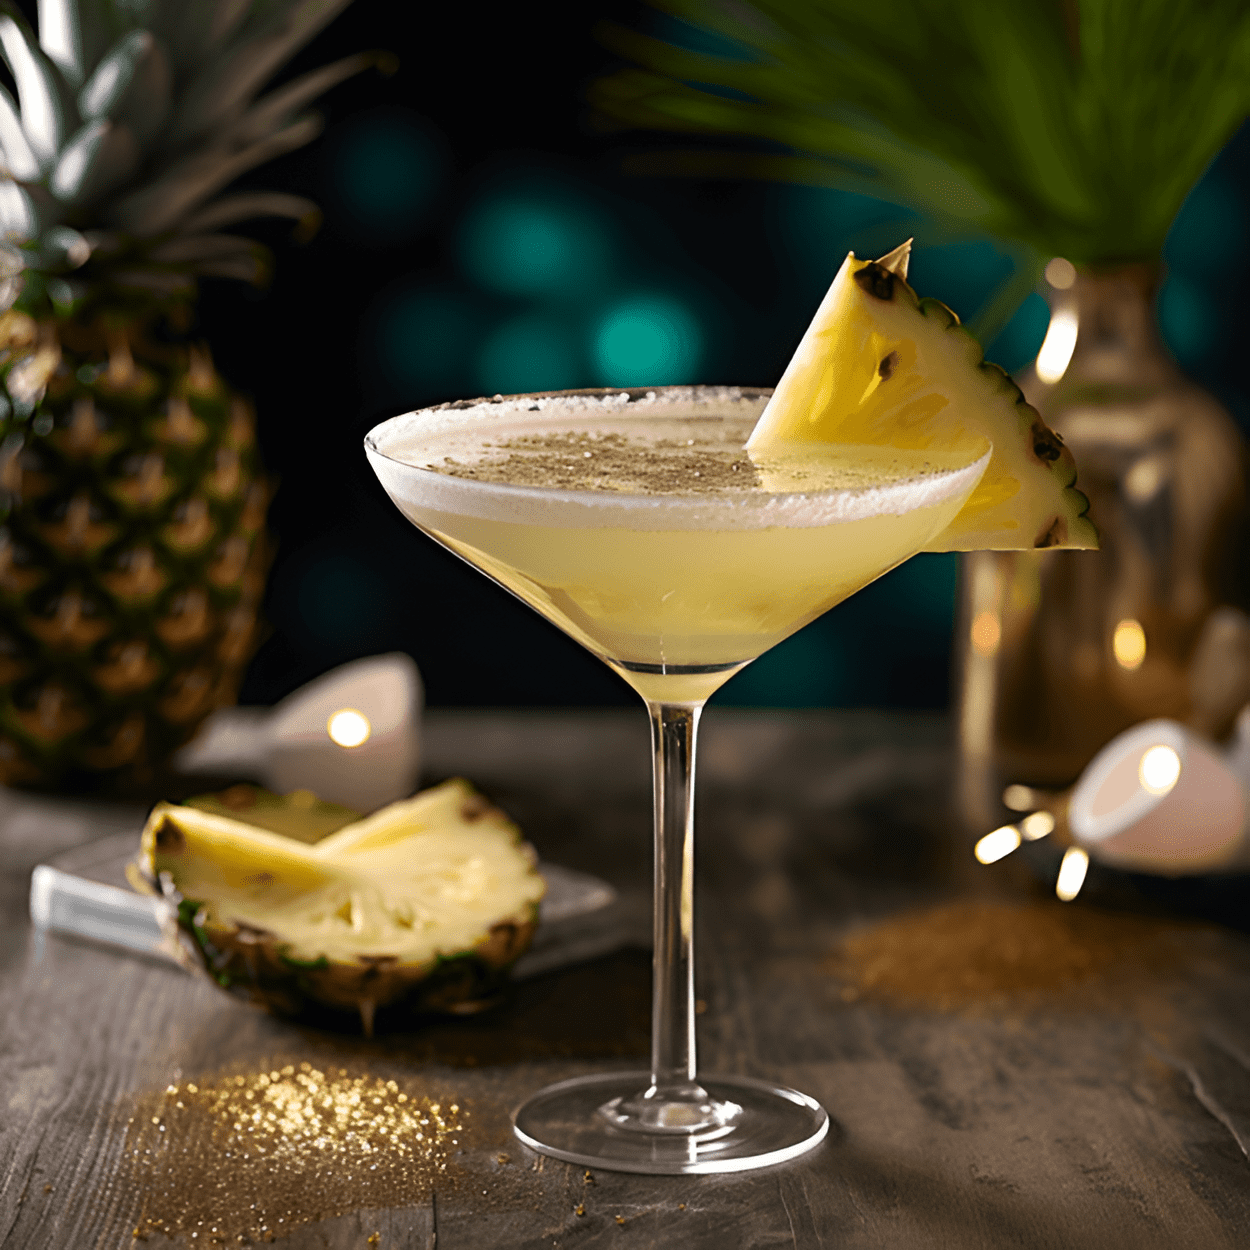 Glitter Cocktail Recipe - The Glitter Cocktail is a sweet and fruity concoction with a hint of tartness. The combination of pineapple and coconut gives it a tropical flavor, while the addition of edible glitter makes it visually stunning.